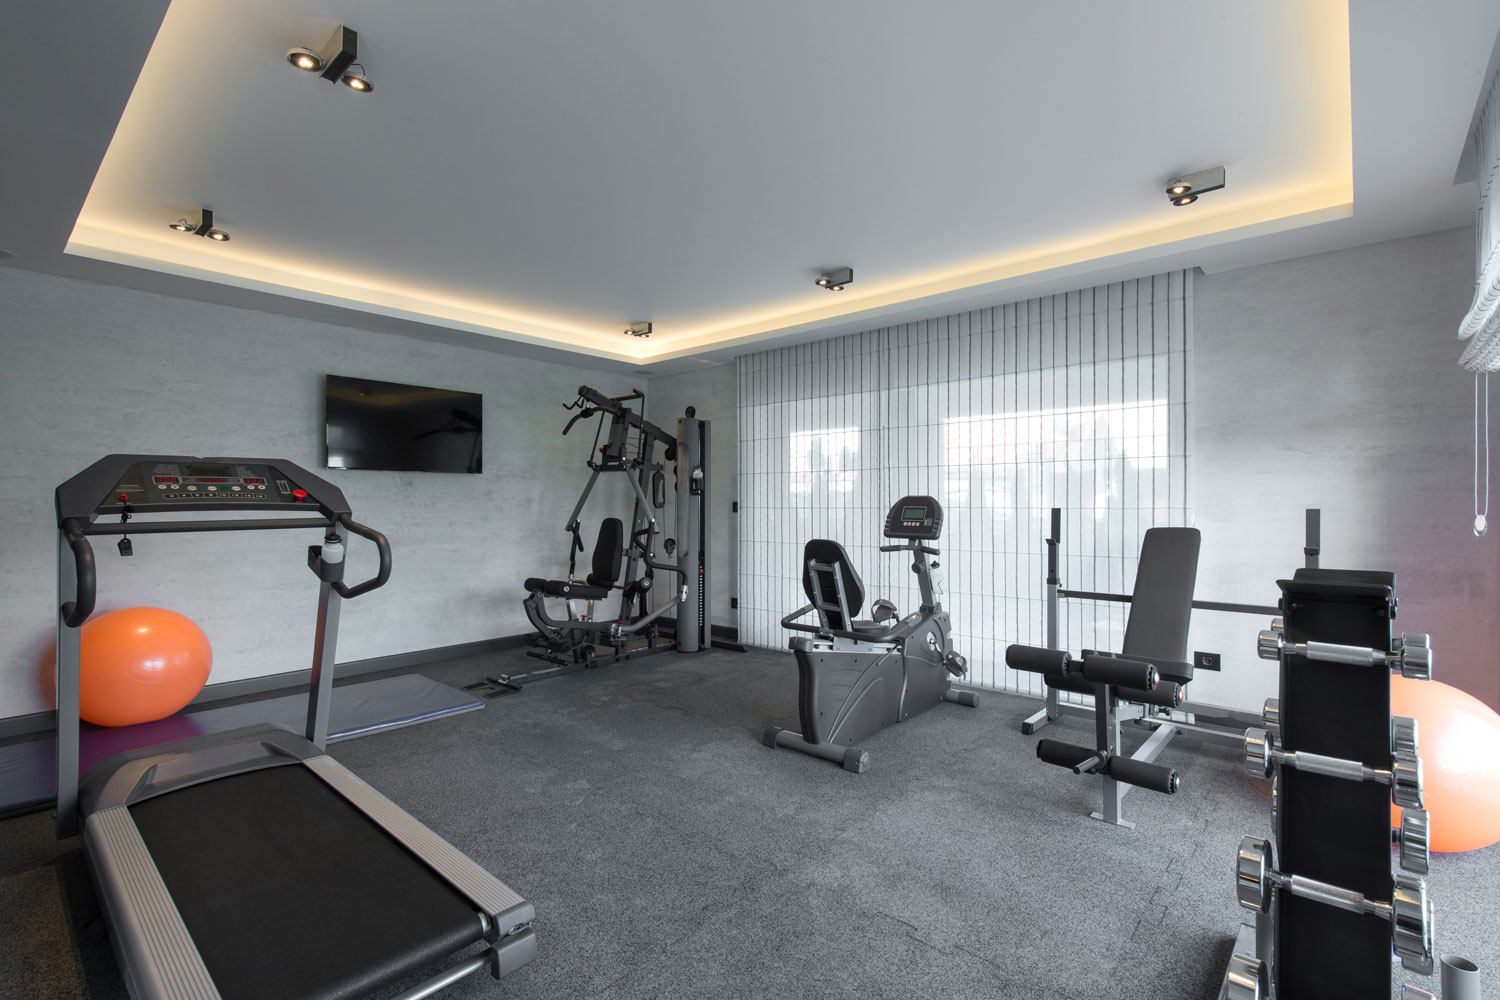 A room converted into a gym with carpeted flooring